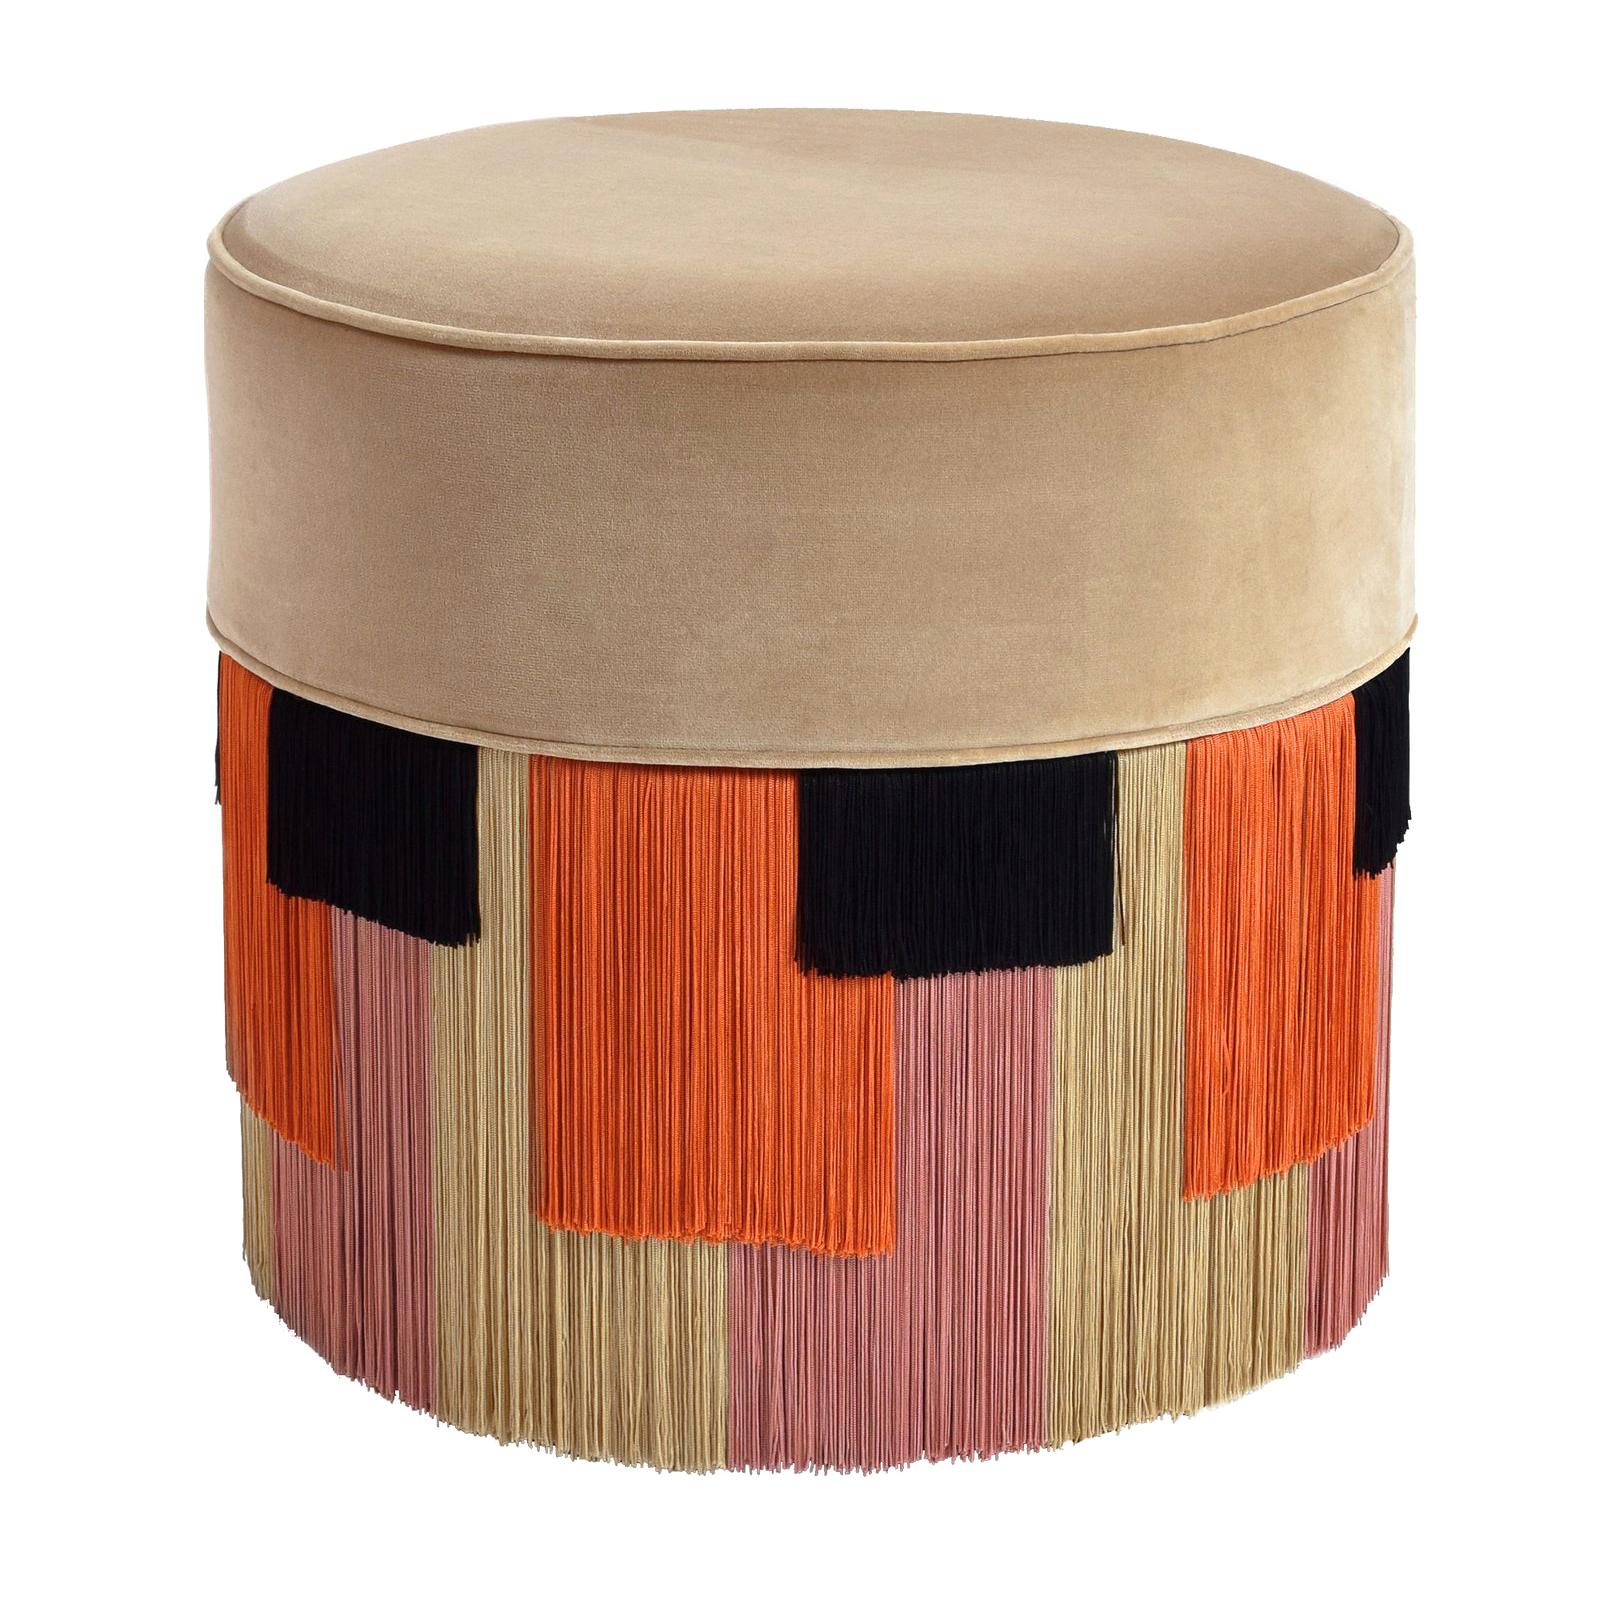 Couture Beige Pouf with Geometric Fringe by Lorenza Bozzoli Design